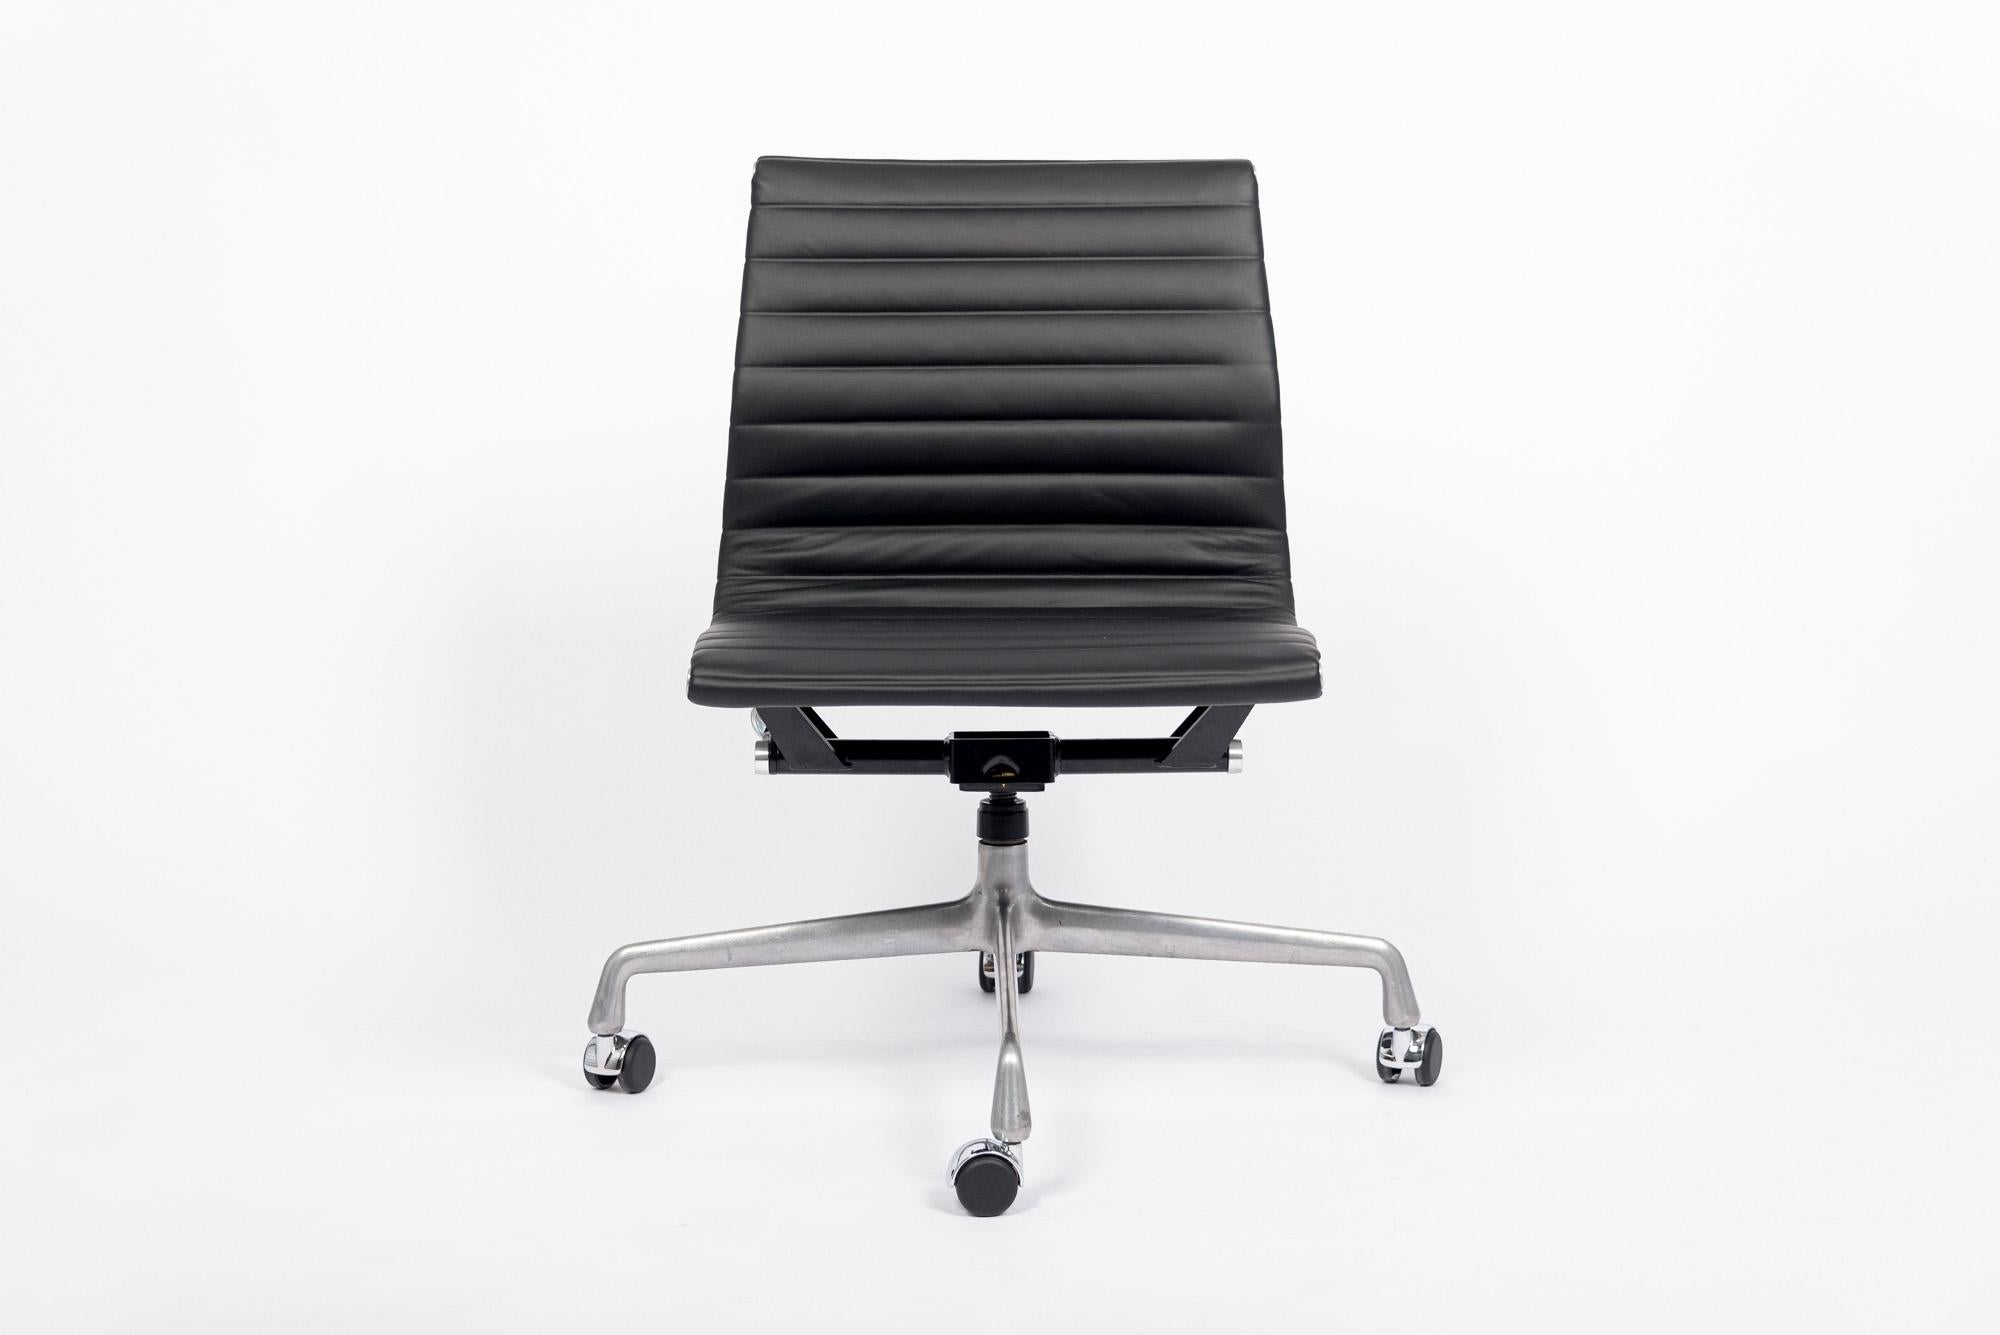 The Aluminum Group Management side office chair designed by Charles & Ray Eames for Herman Miller is from the Eames Aluminum Group Collection. These distinctive chairs resulted from the Eames's experimentation with aluminum, which became more